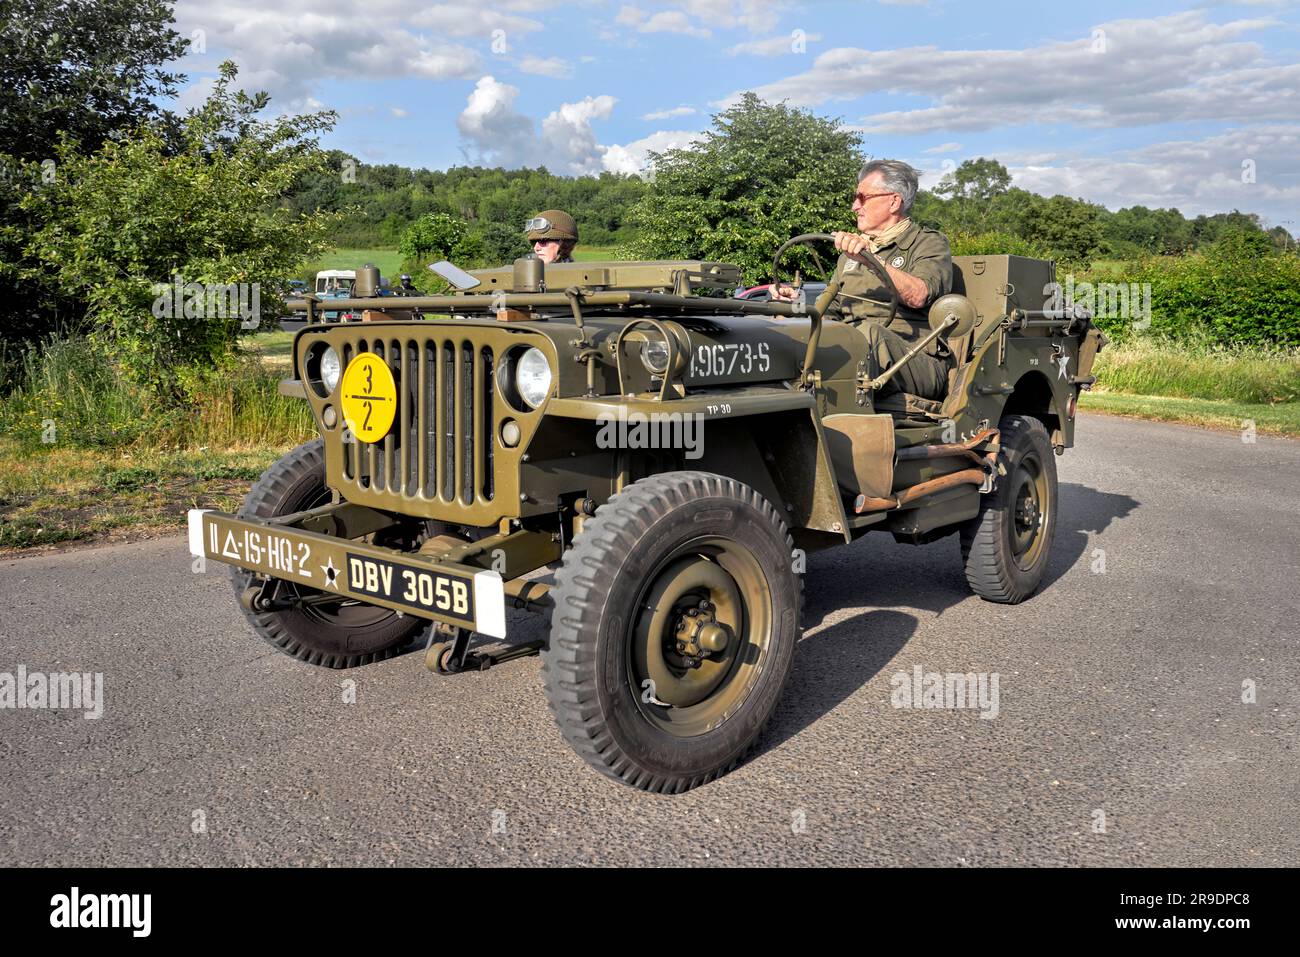 Willys Jeep 1950s American military vehicle Stock Photo